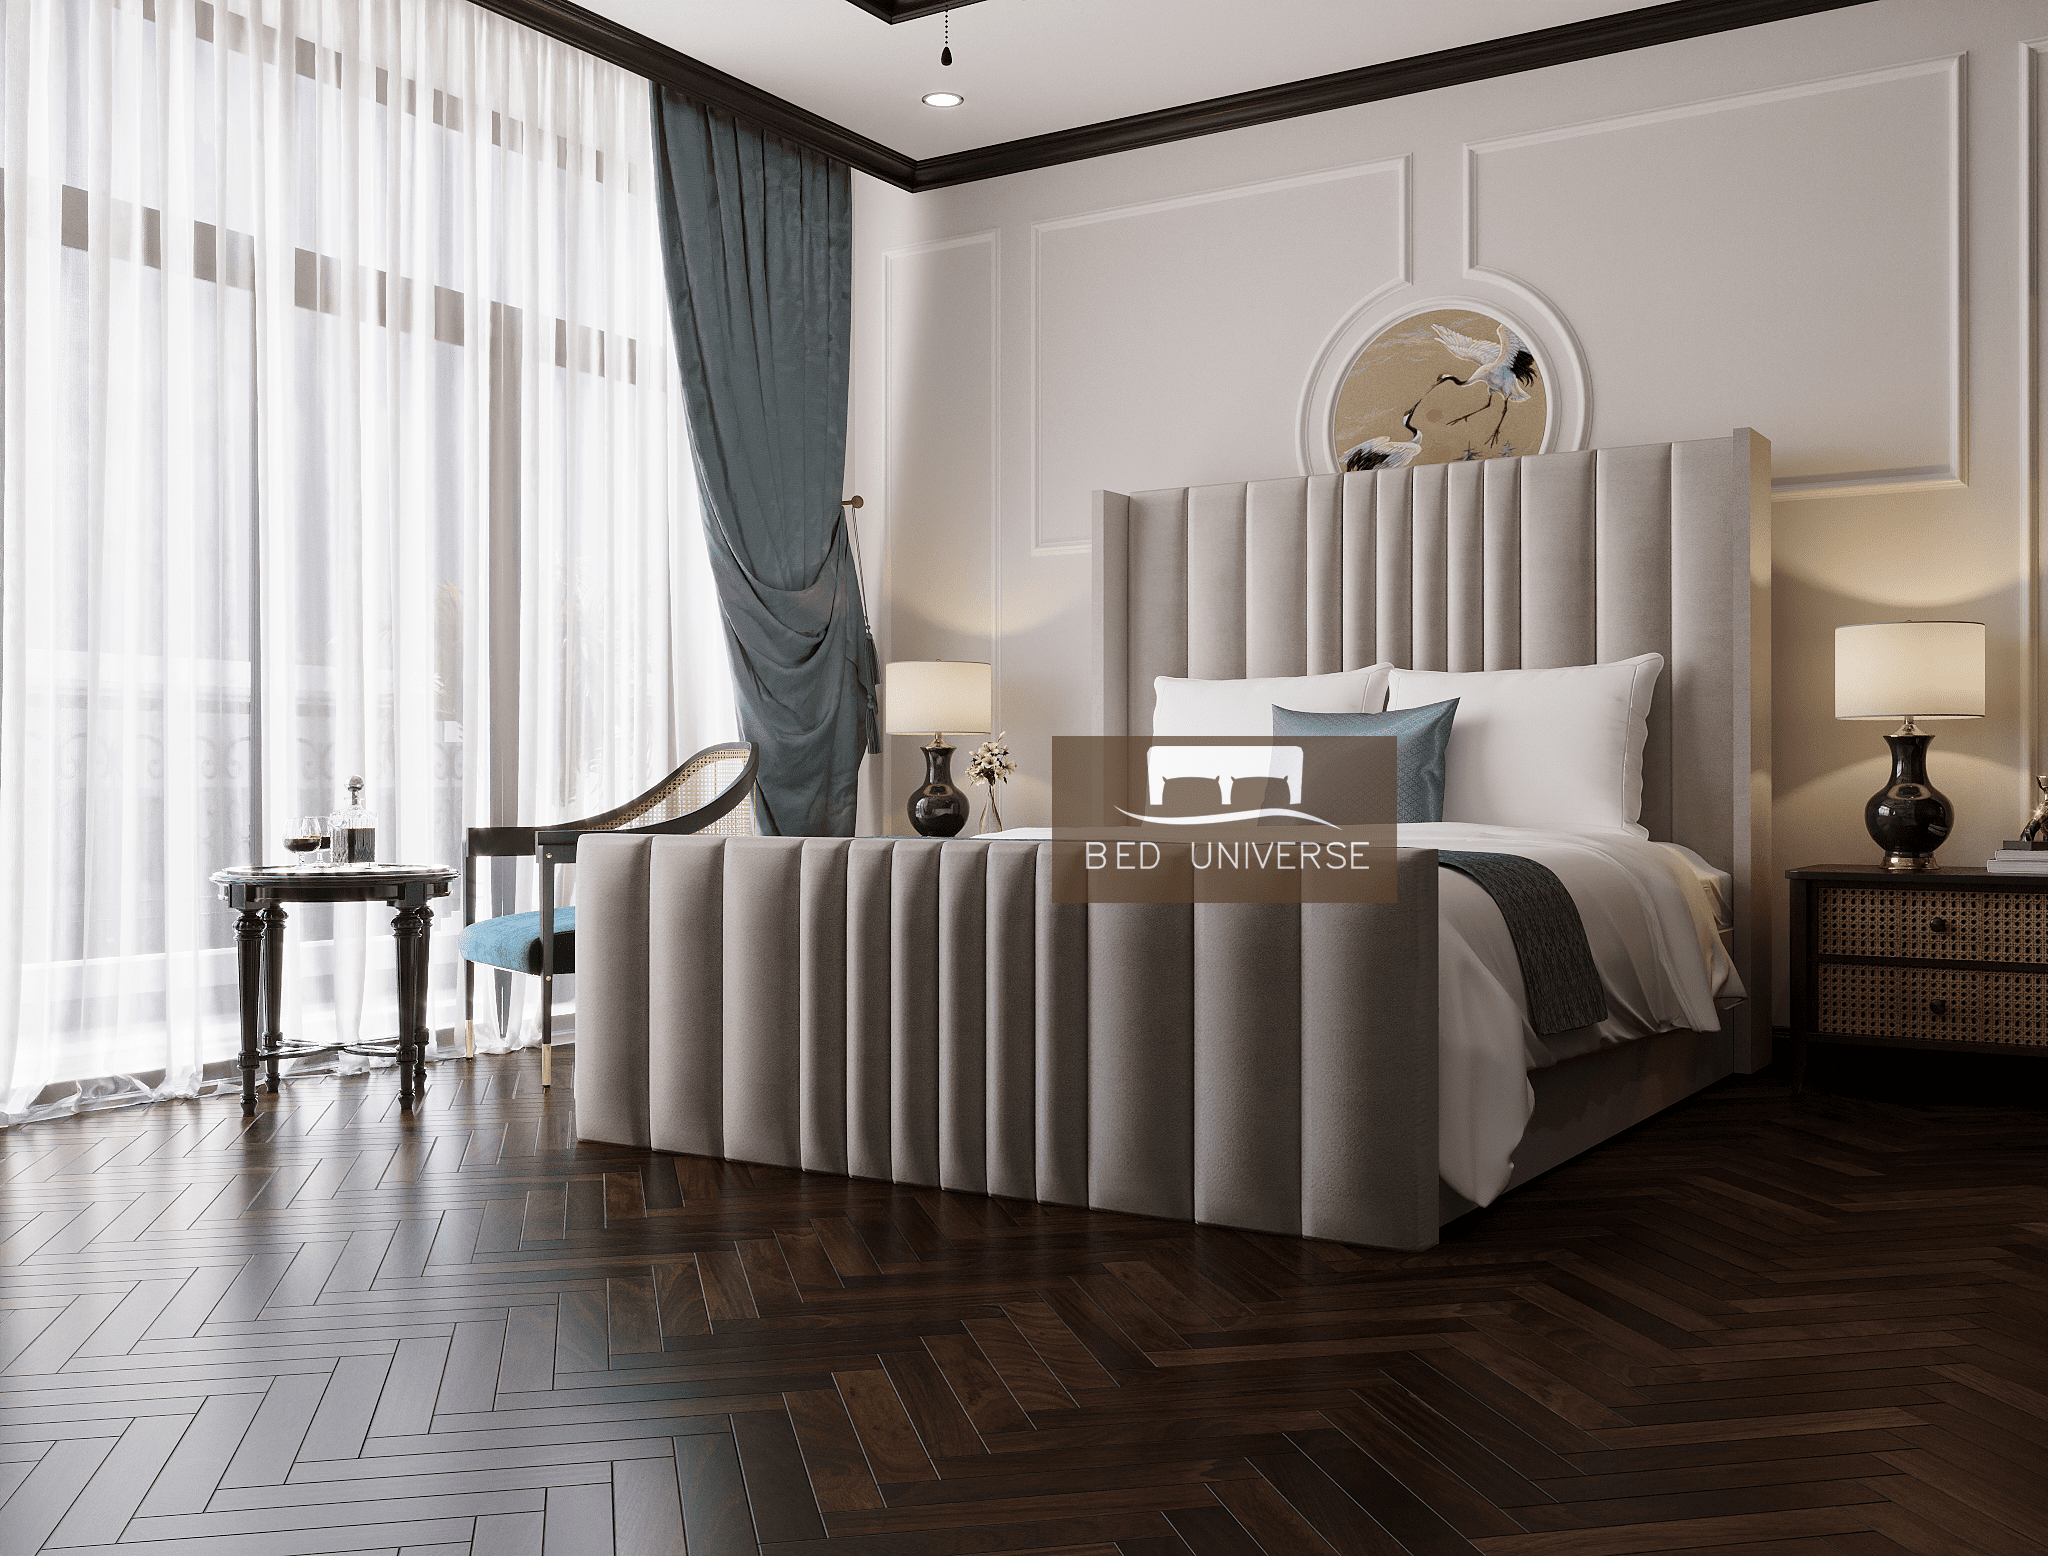 Millhouse Winged Bed Frame, Winged Bed, Stripe Bed, Plush Bed, Wingback Bed, Upholstered Bed